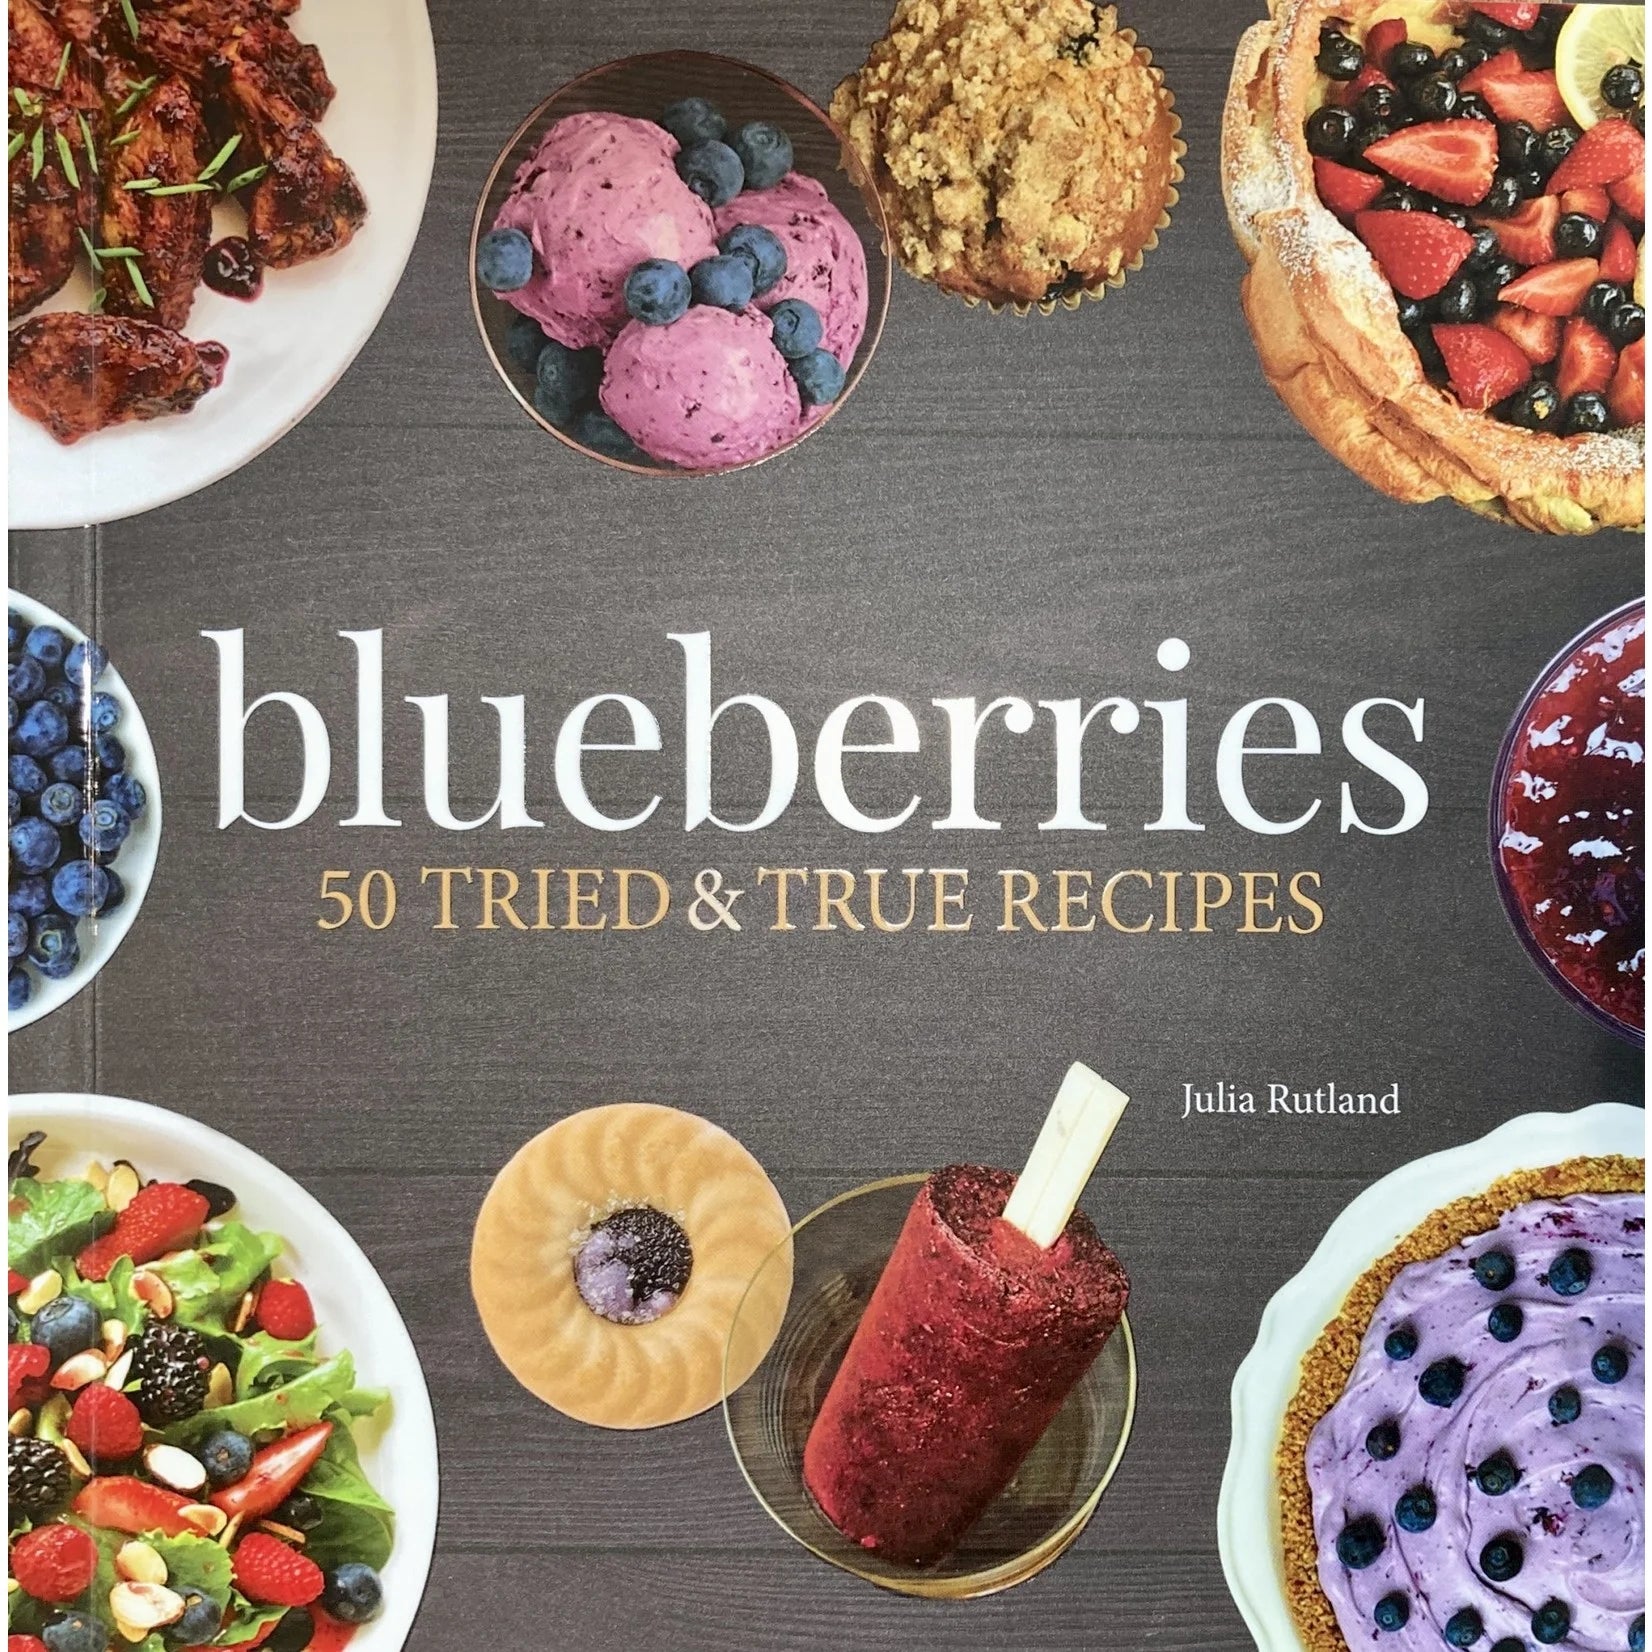 Blueberries - 50 Tried and True Recipes